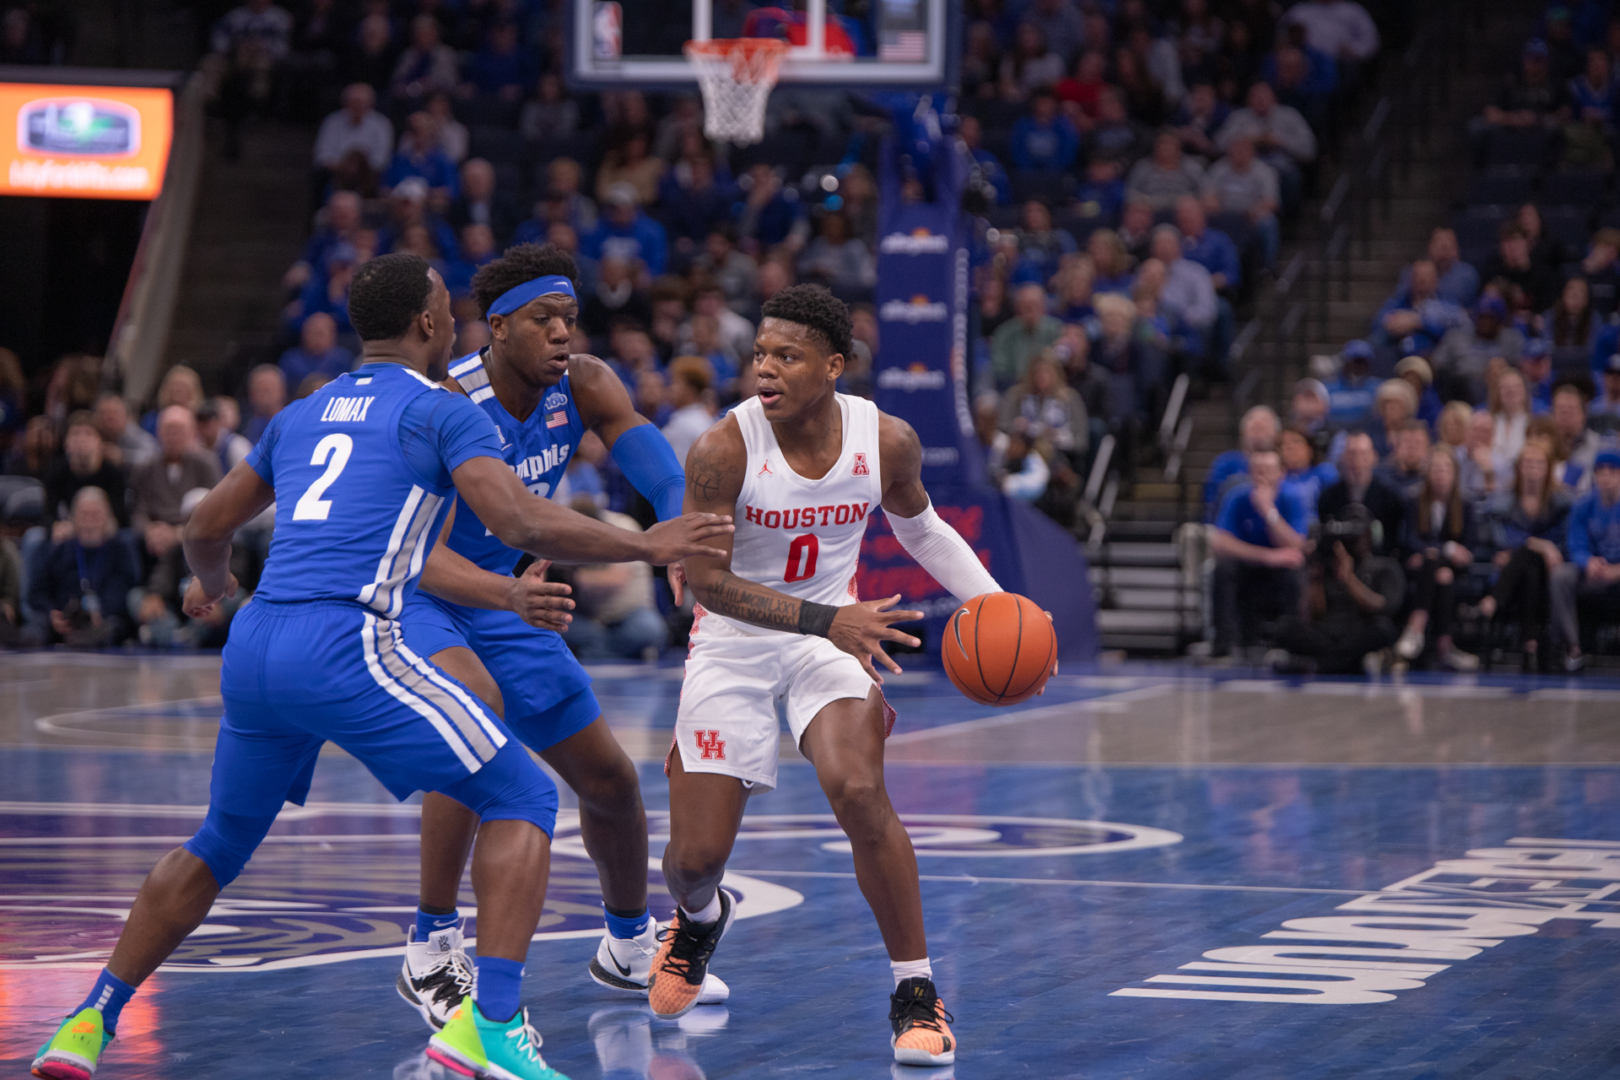 Freshman guard Marcus Sasser continued his recent success on Saturday against Memphis despite the loss, scoring 18 points and grabbing six rebounds. | Kathryn Lenihan/The Cougar